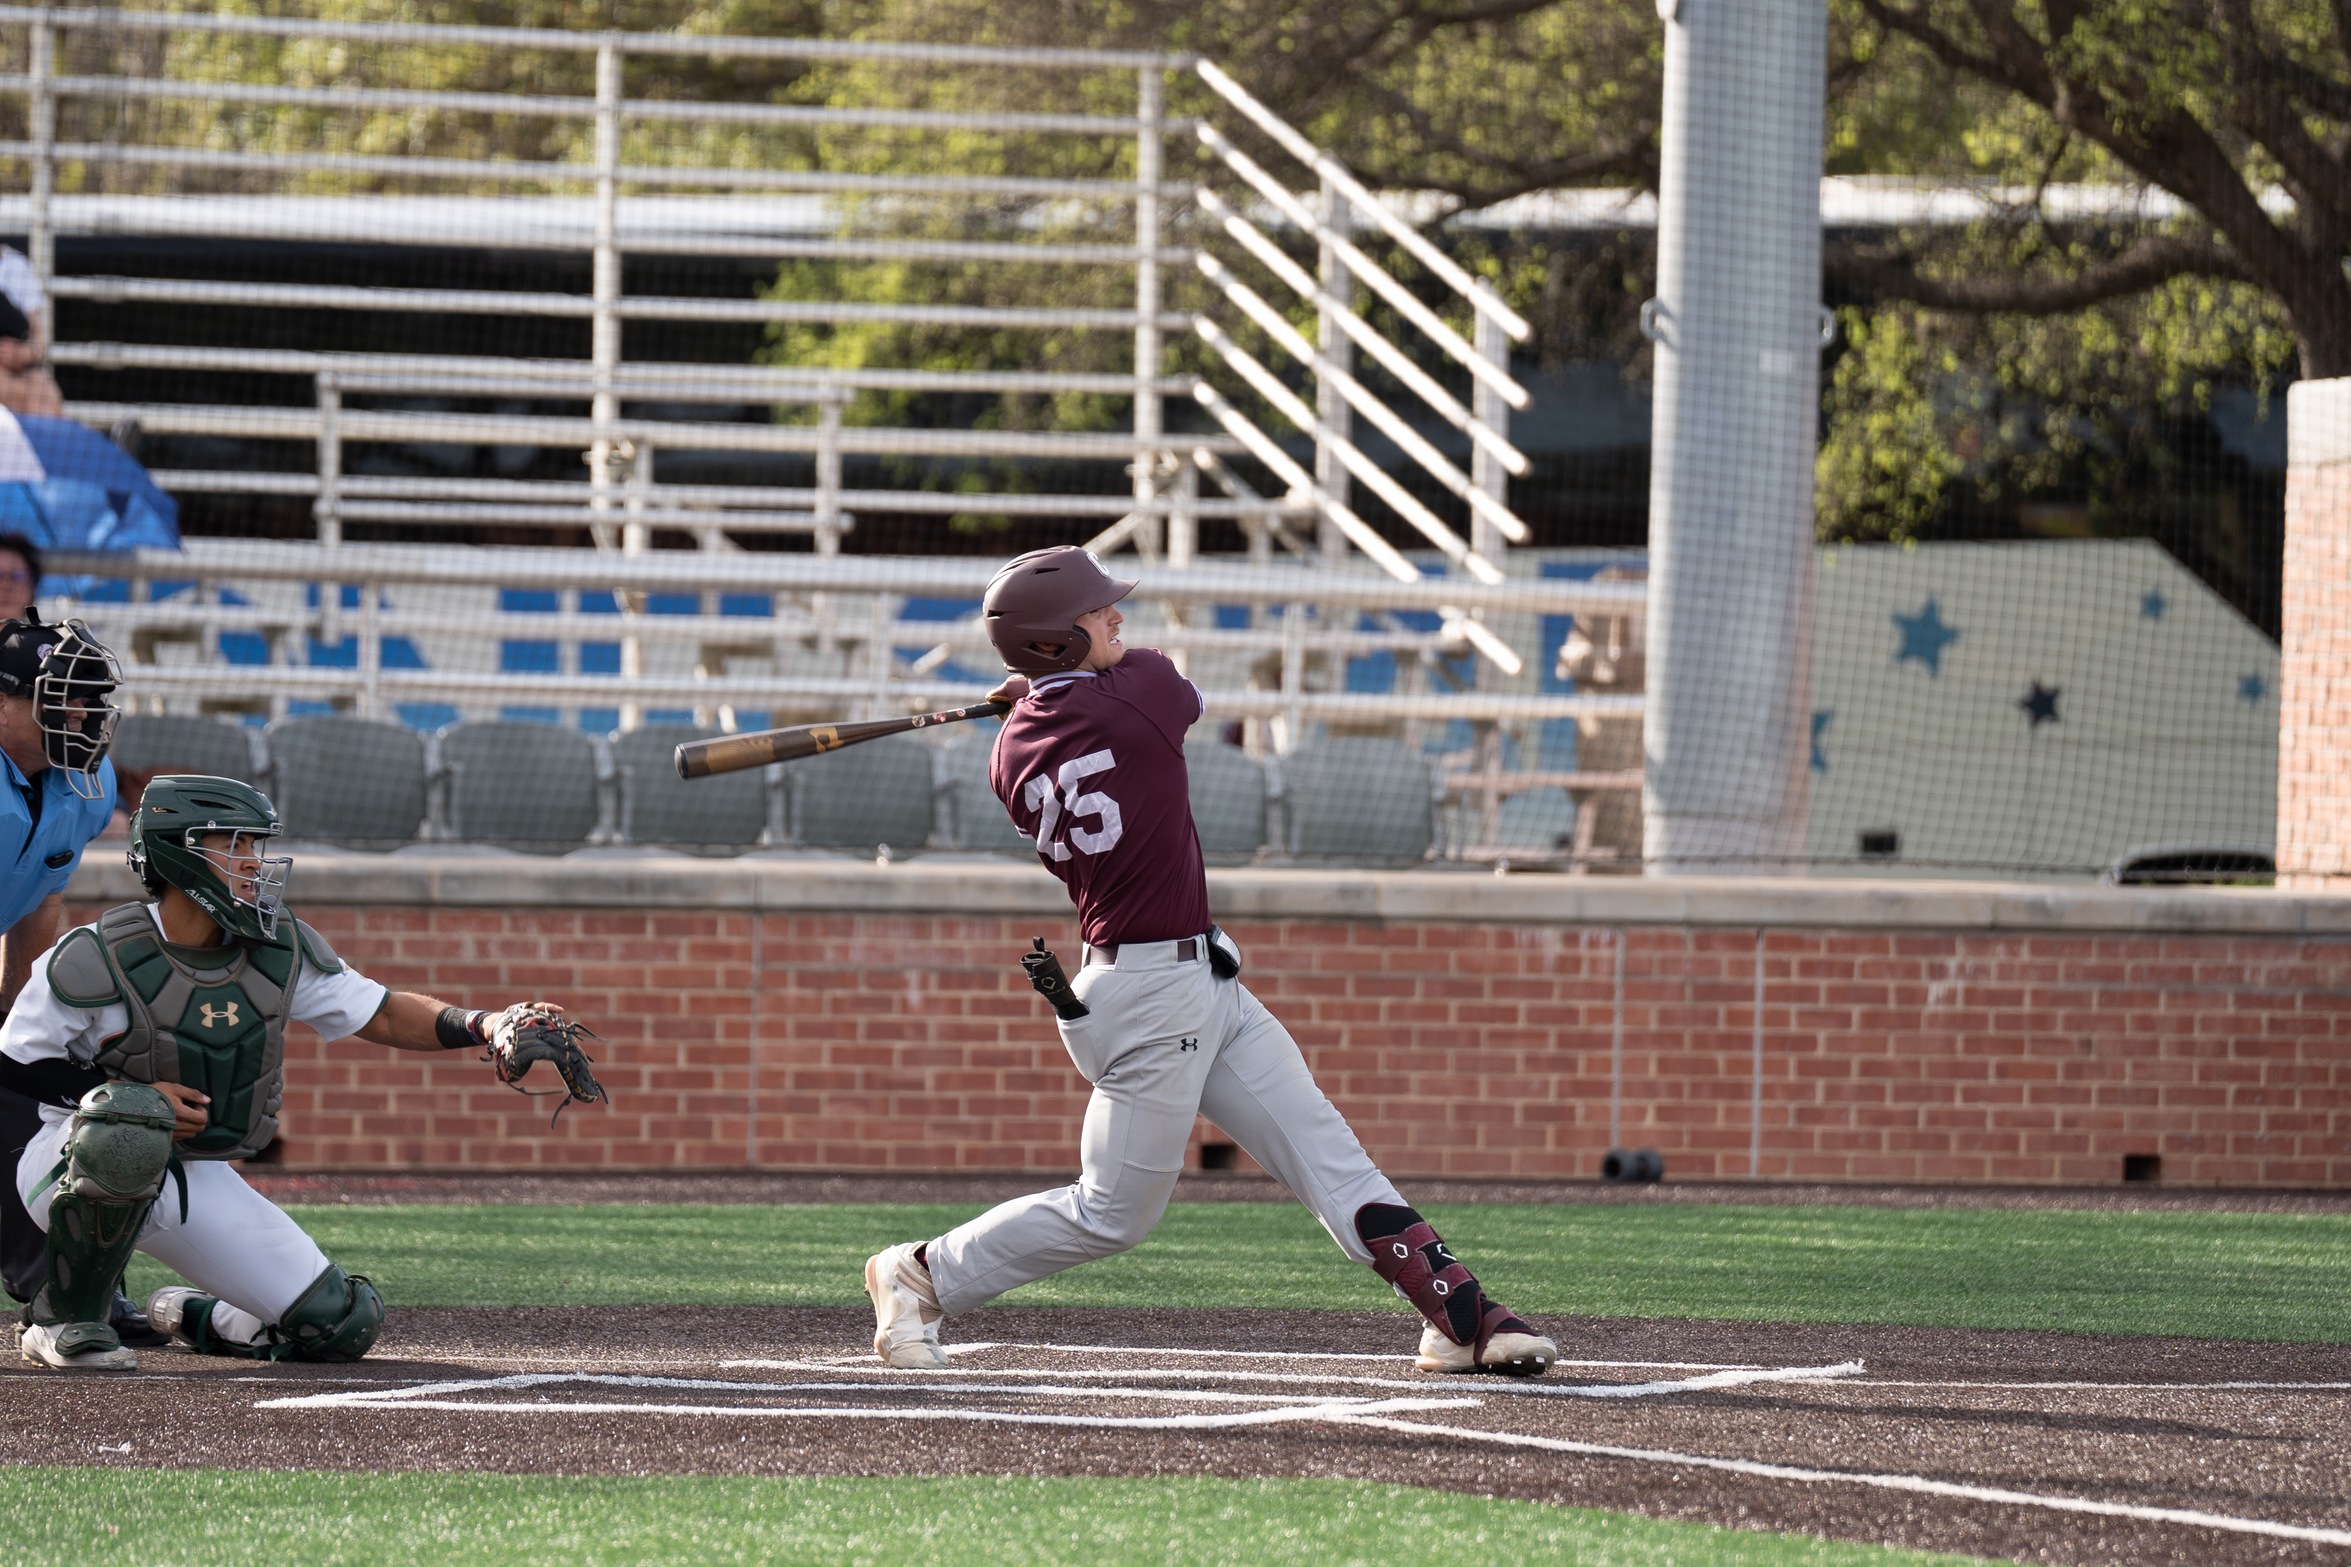 Sophomore CF Collin Pitts and the potent Centenary offense face Schreiner on the road this weekend.